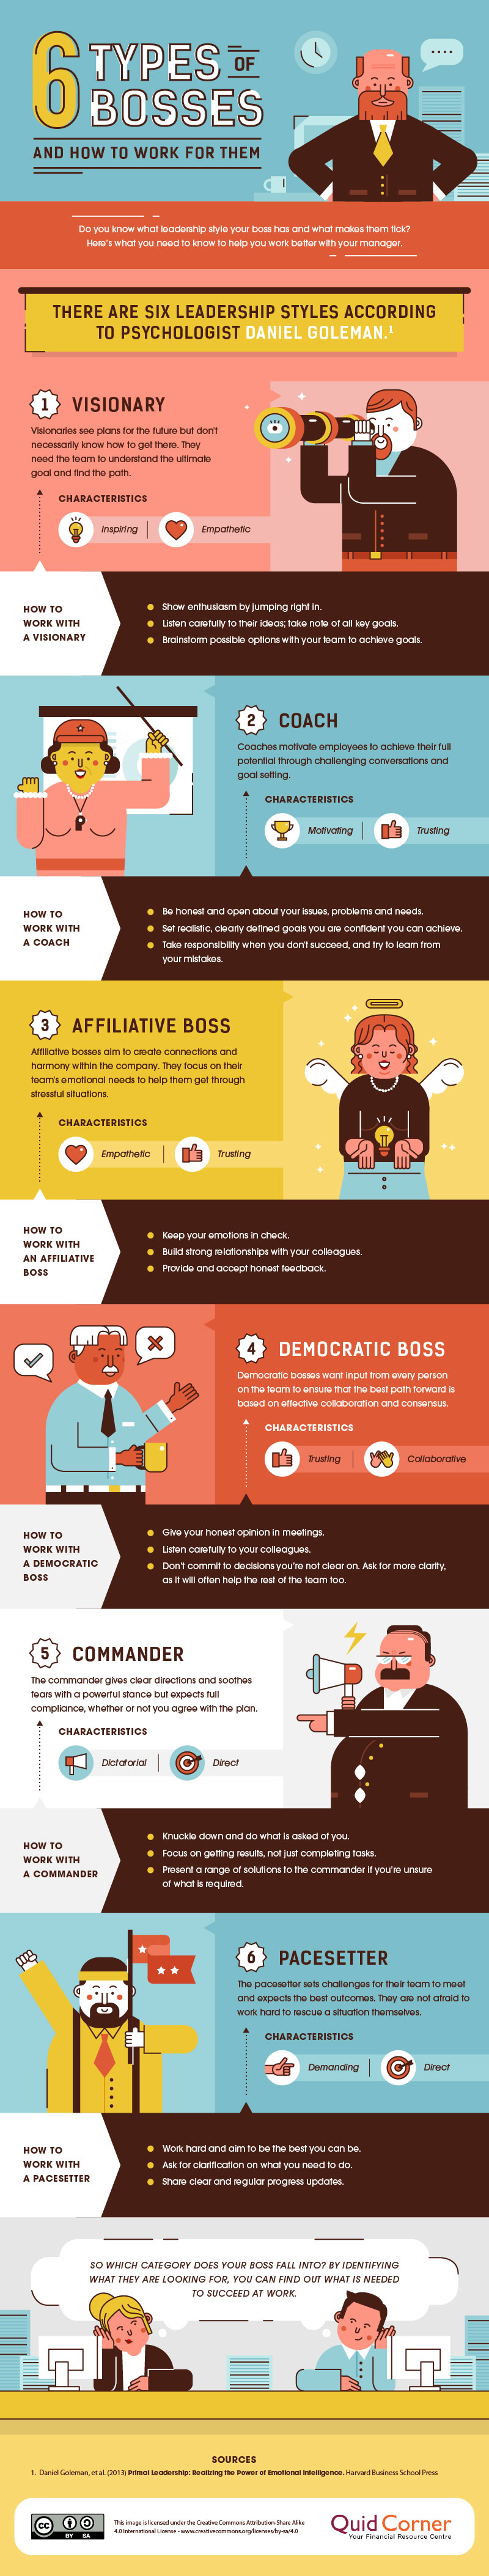 6 Types of Bosses (and How to Work for Them)